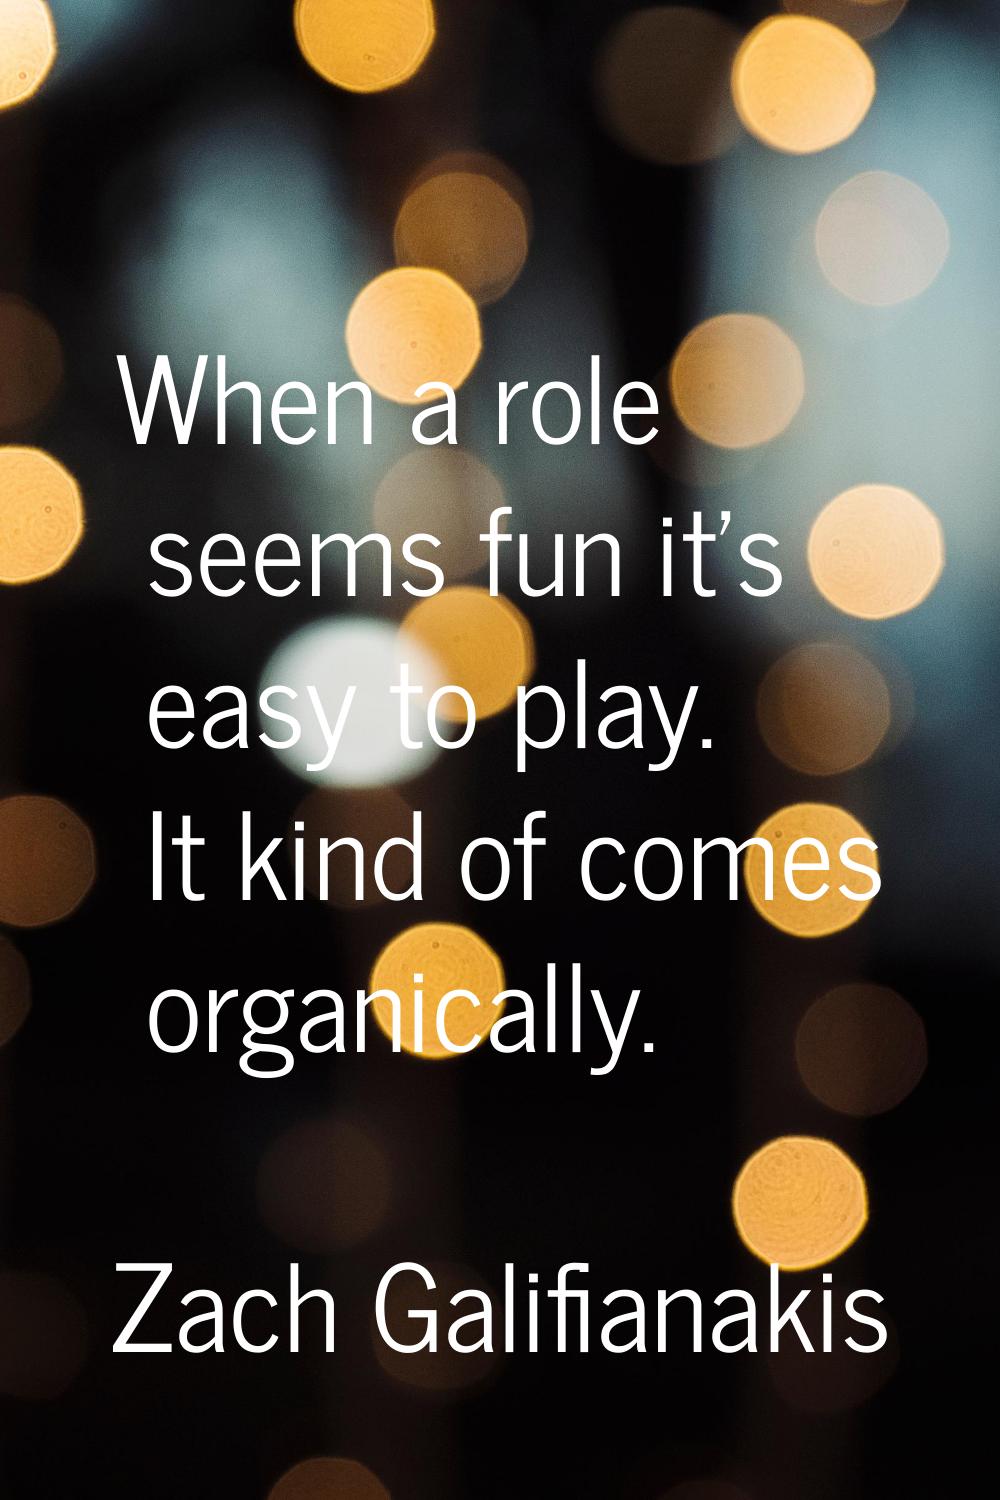 When a role seems fun it's easy to play. It kind of comes organically.